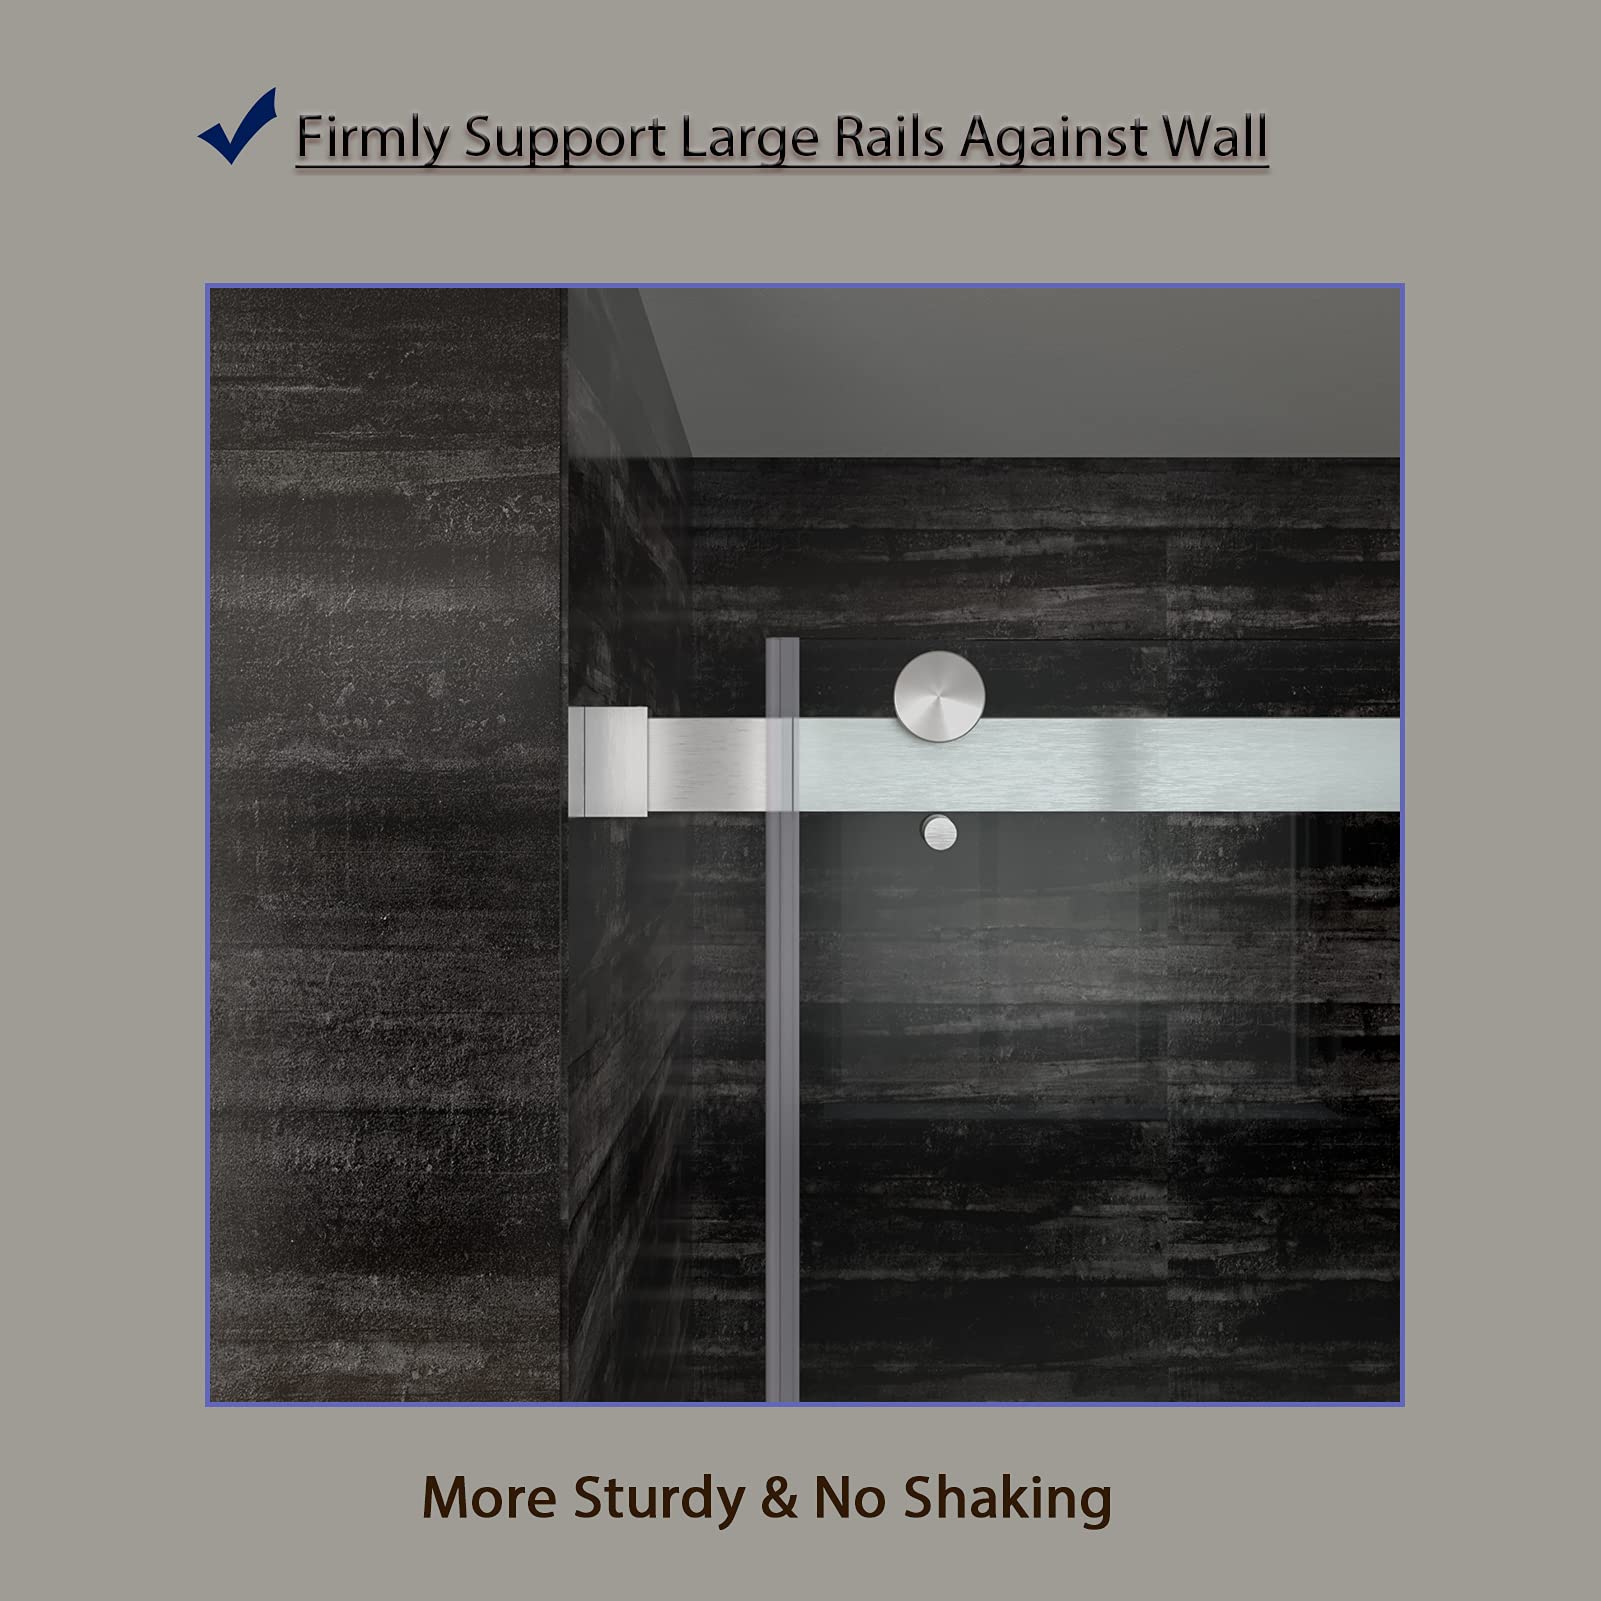 firmly support large rails against wall（more sturdy & no shaking）